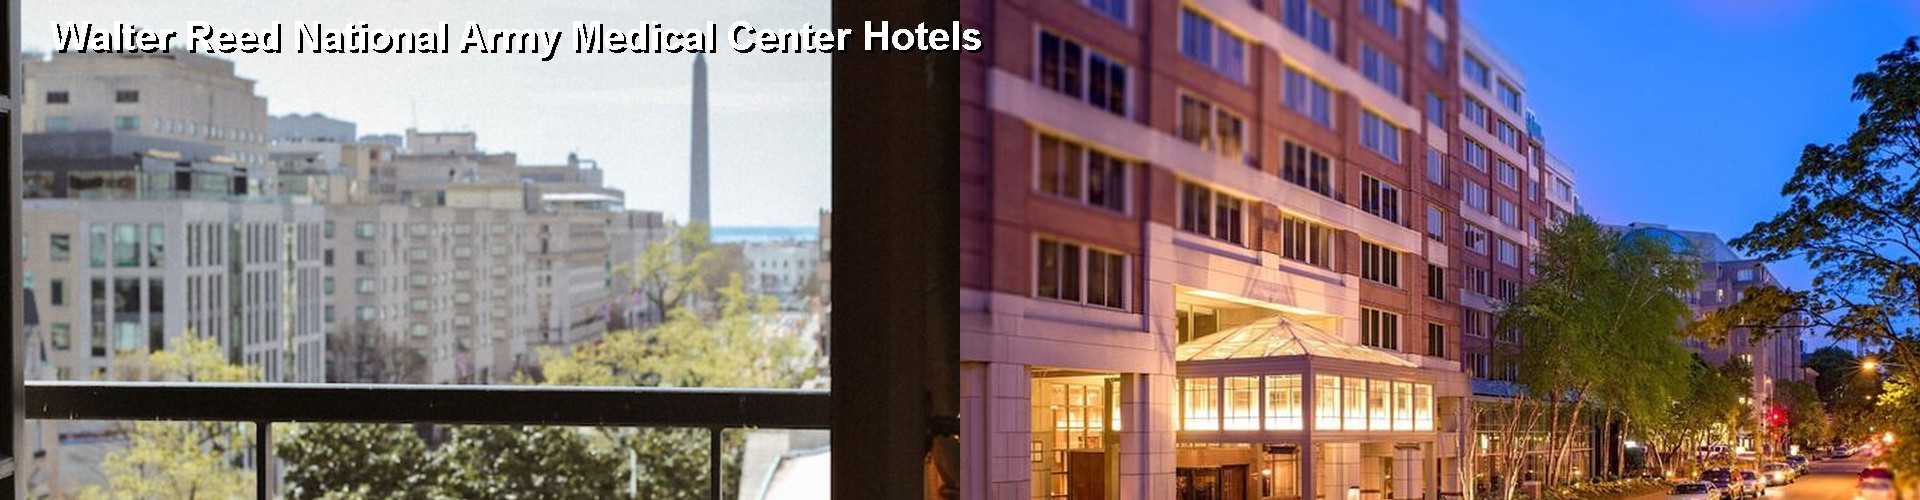 3 Best Hotels near Walter Reed National Army Medical Center